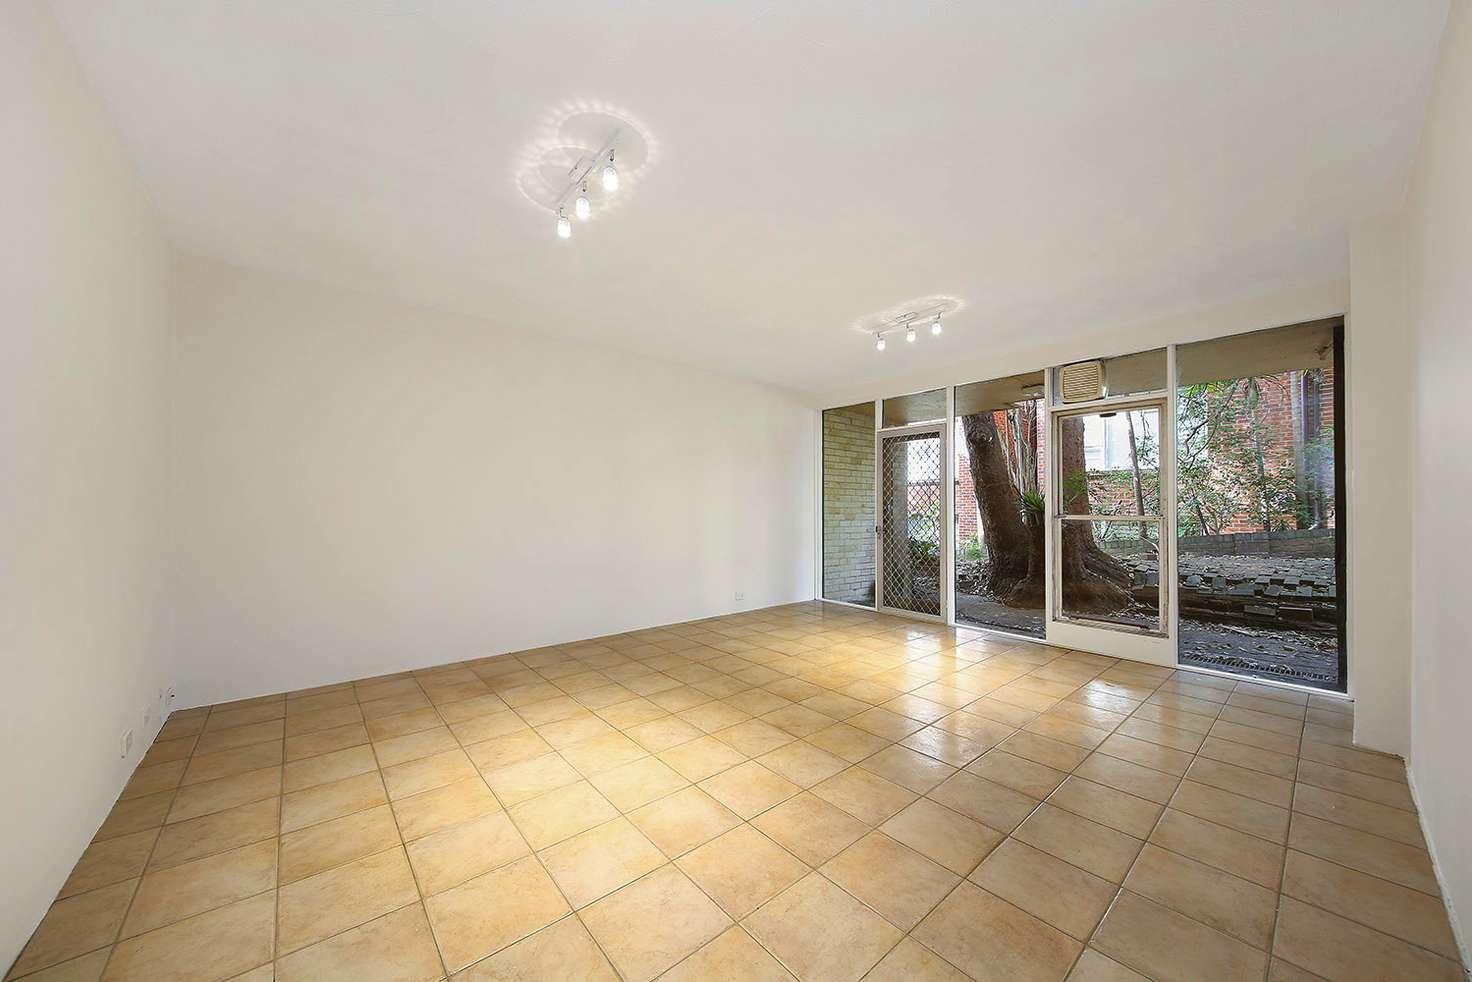 Main view of Homely apartment listing, 9/4 Holt St, Double Bay NSW 2028